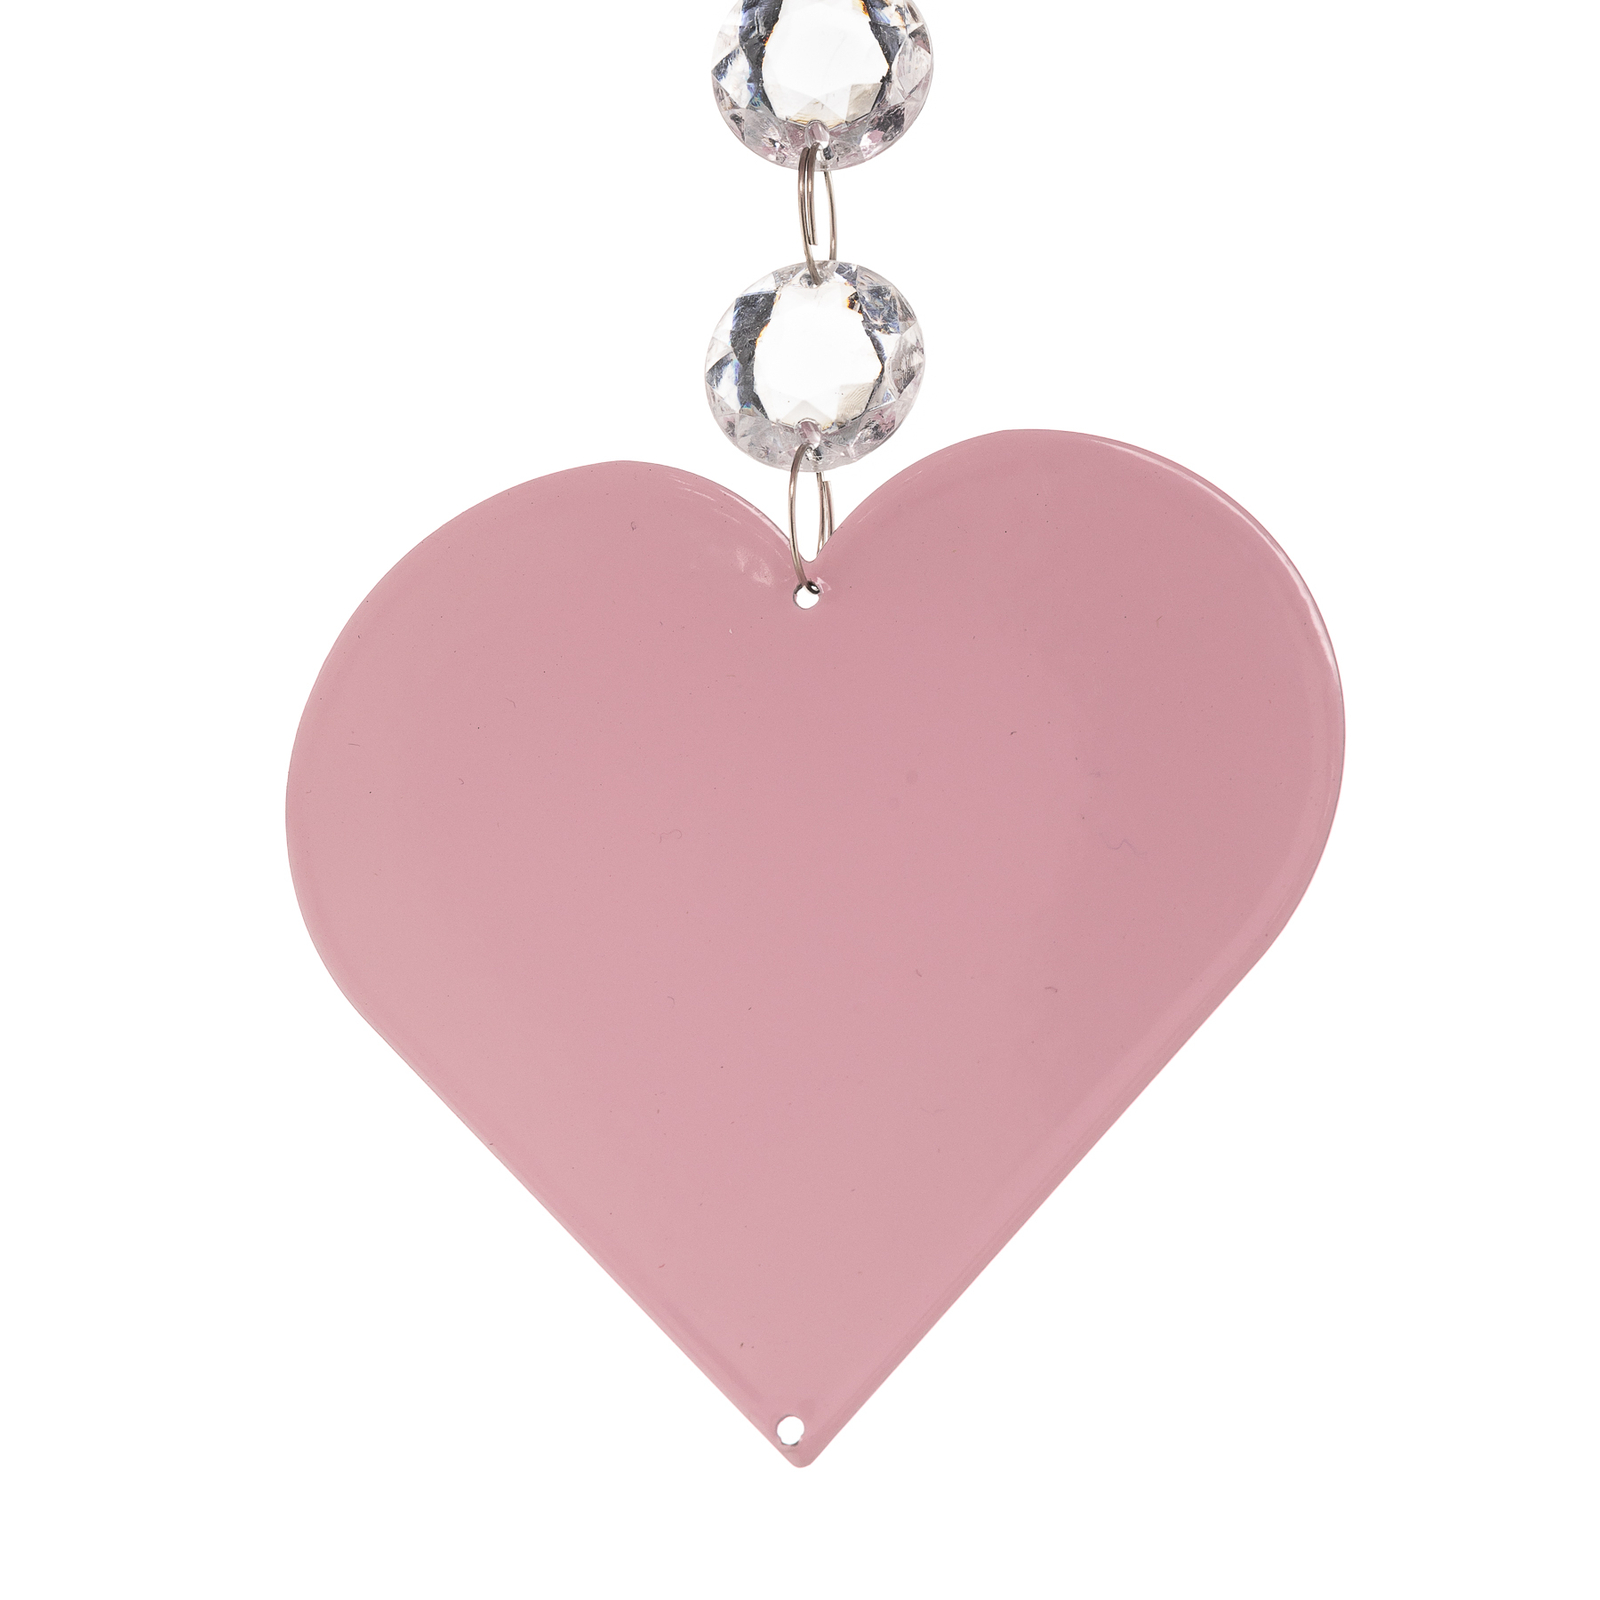 Corazon ceiling light in magenta with heart